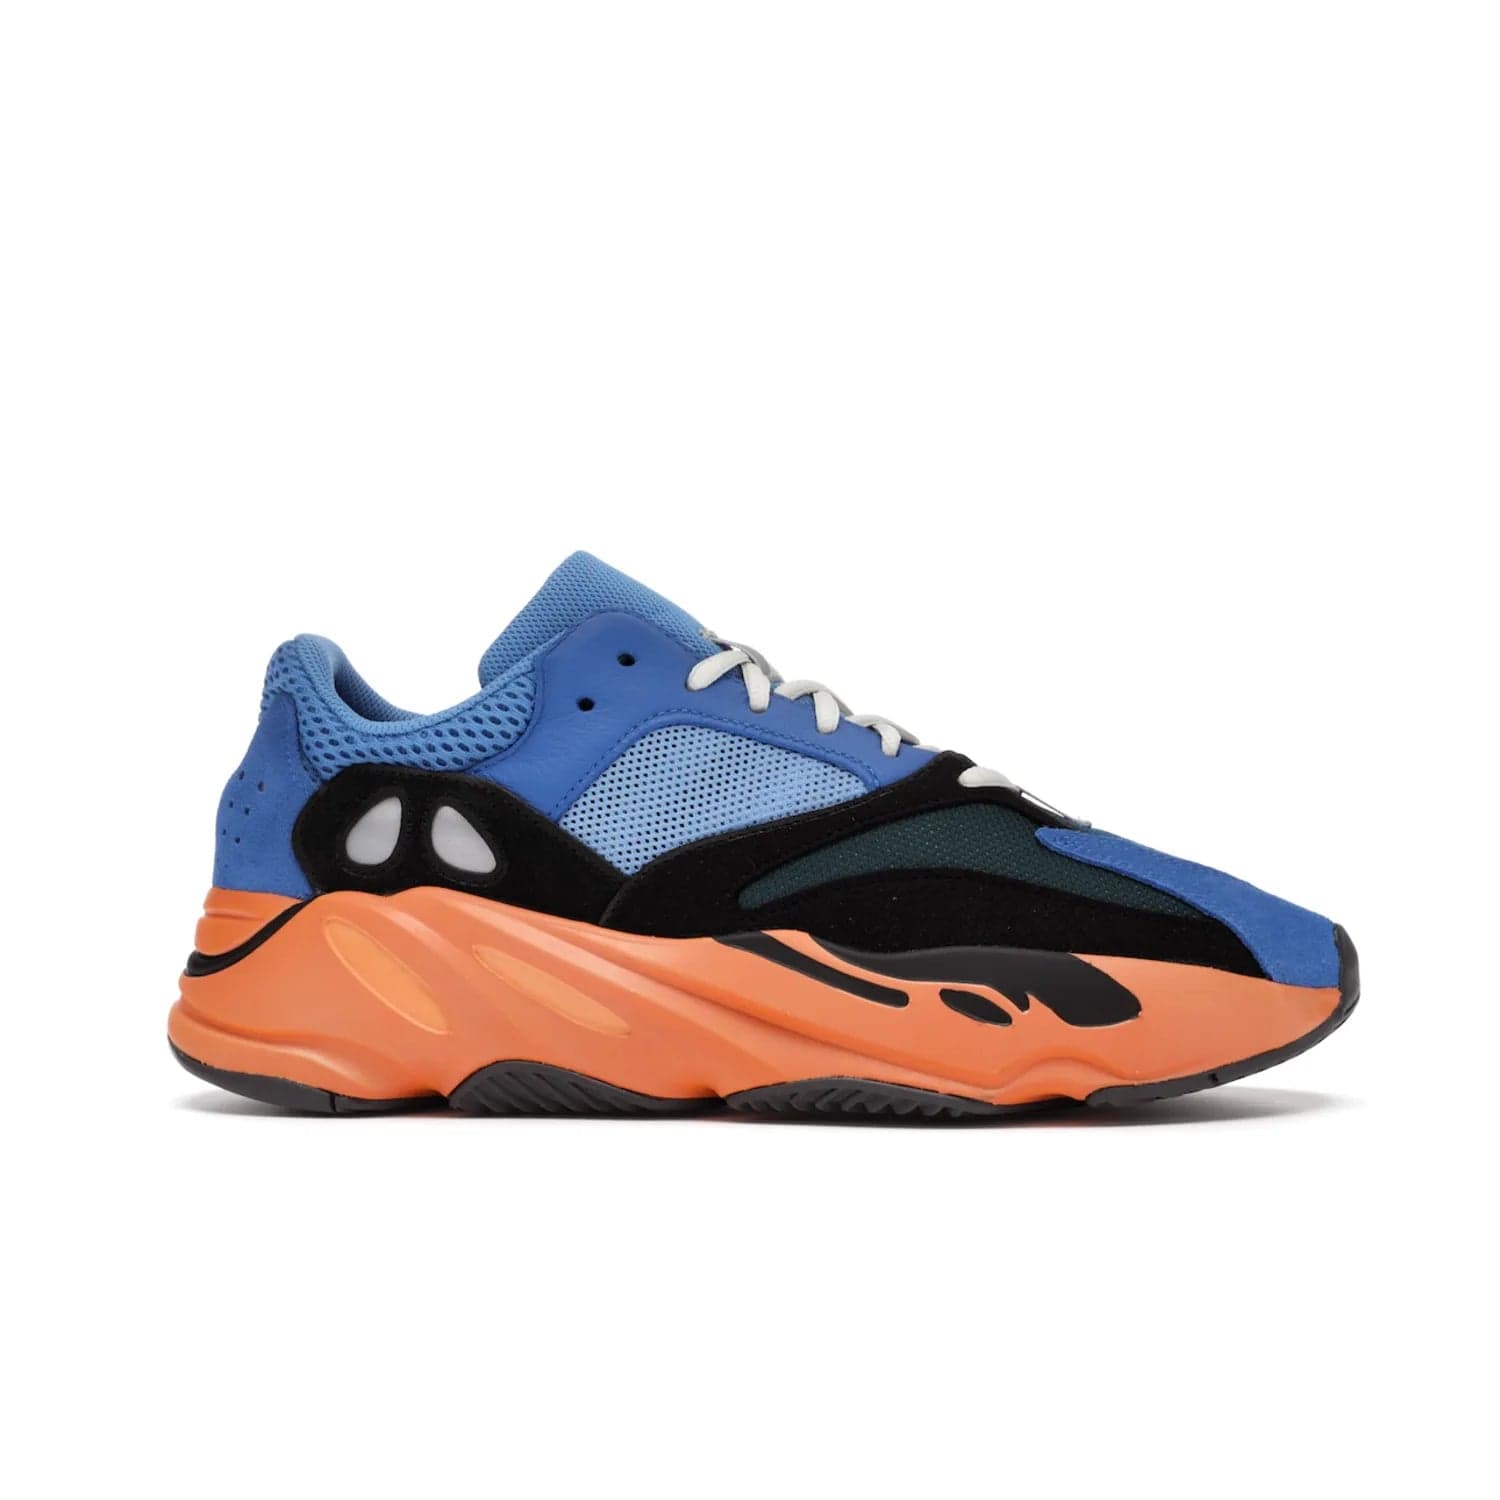 adidas Yeezy Boost 700 Bright Blue - Image 2 - Only at www.BallersClubKickz.com - Iconic sneaker style meets vibrant colour with the adidas Yeezy Boost 700 Bright Blue. Reflective accents, turquoise and teal panels, bright orange midsole and black outsole make for a bold release. April 2021.